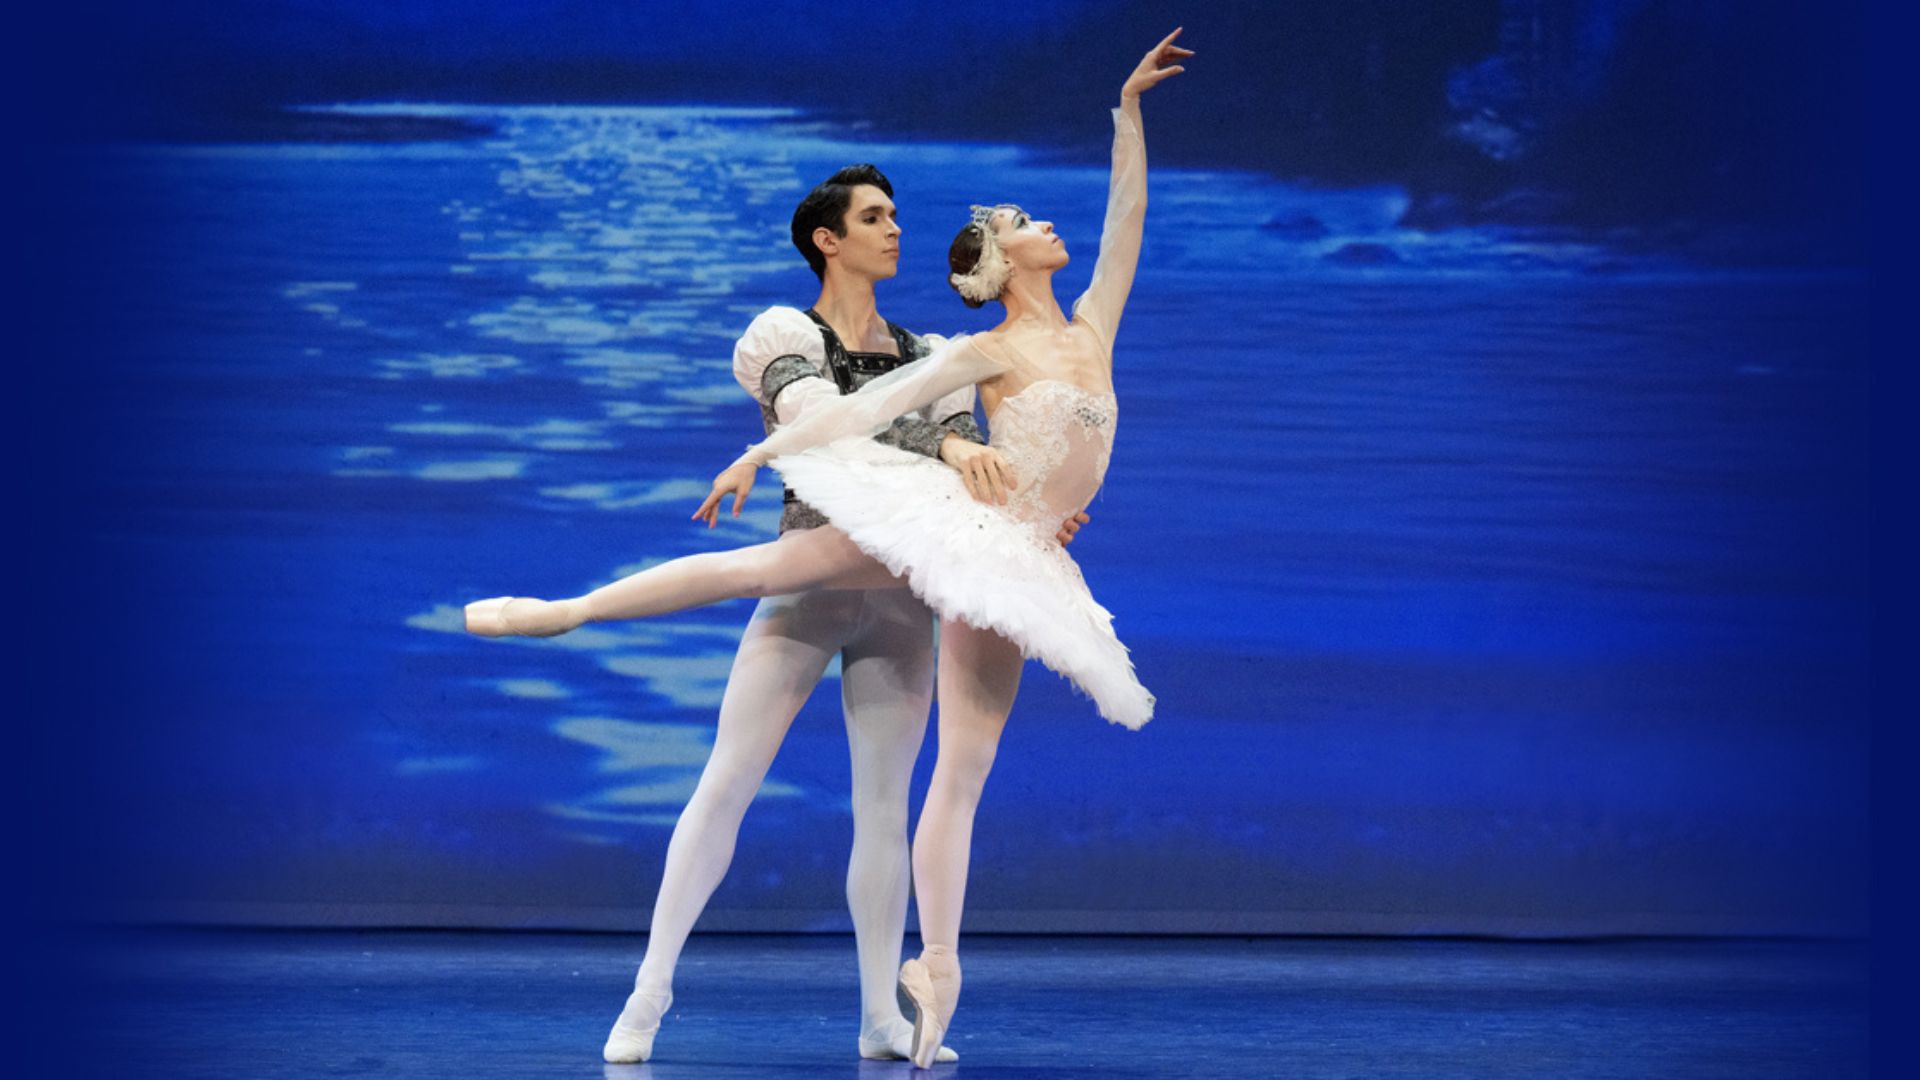 Male ballet dancer with his arms around female dancer En ponte dressed in a tutu 